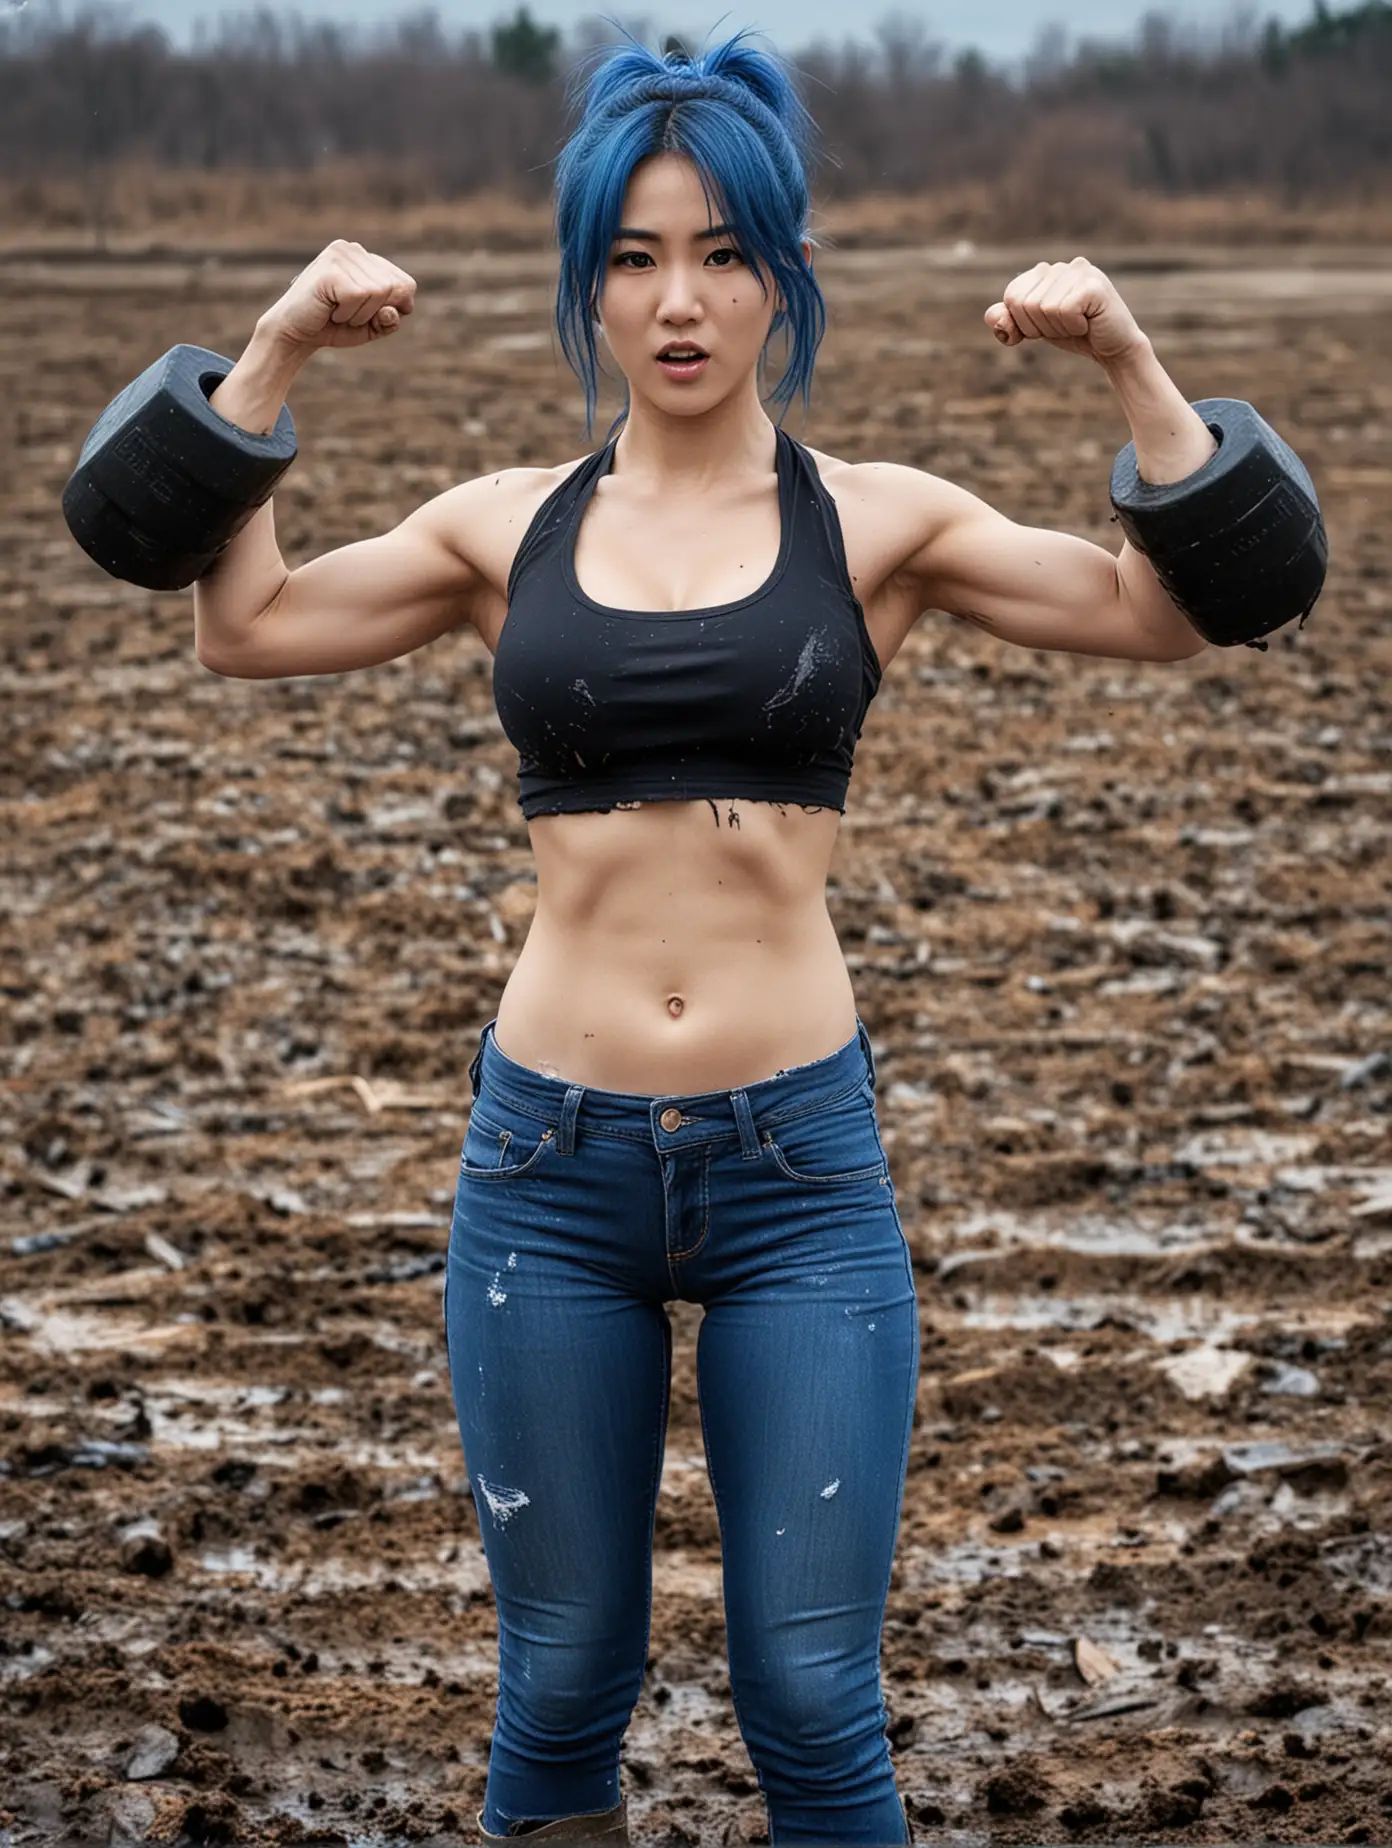 korean woman blue hair pony tail wresting dark blue jeans very very large breasts muddy field lifting weights muscular arms flexing punching